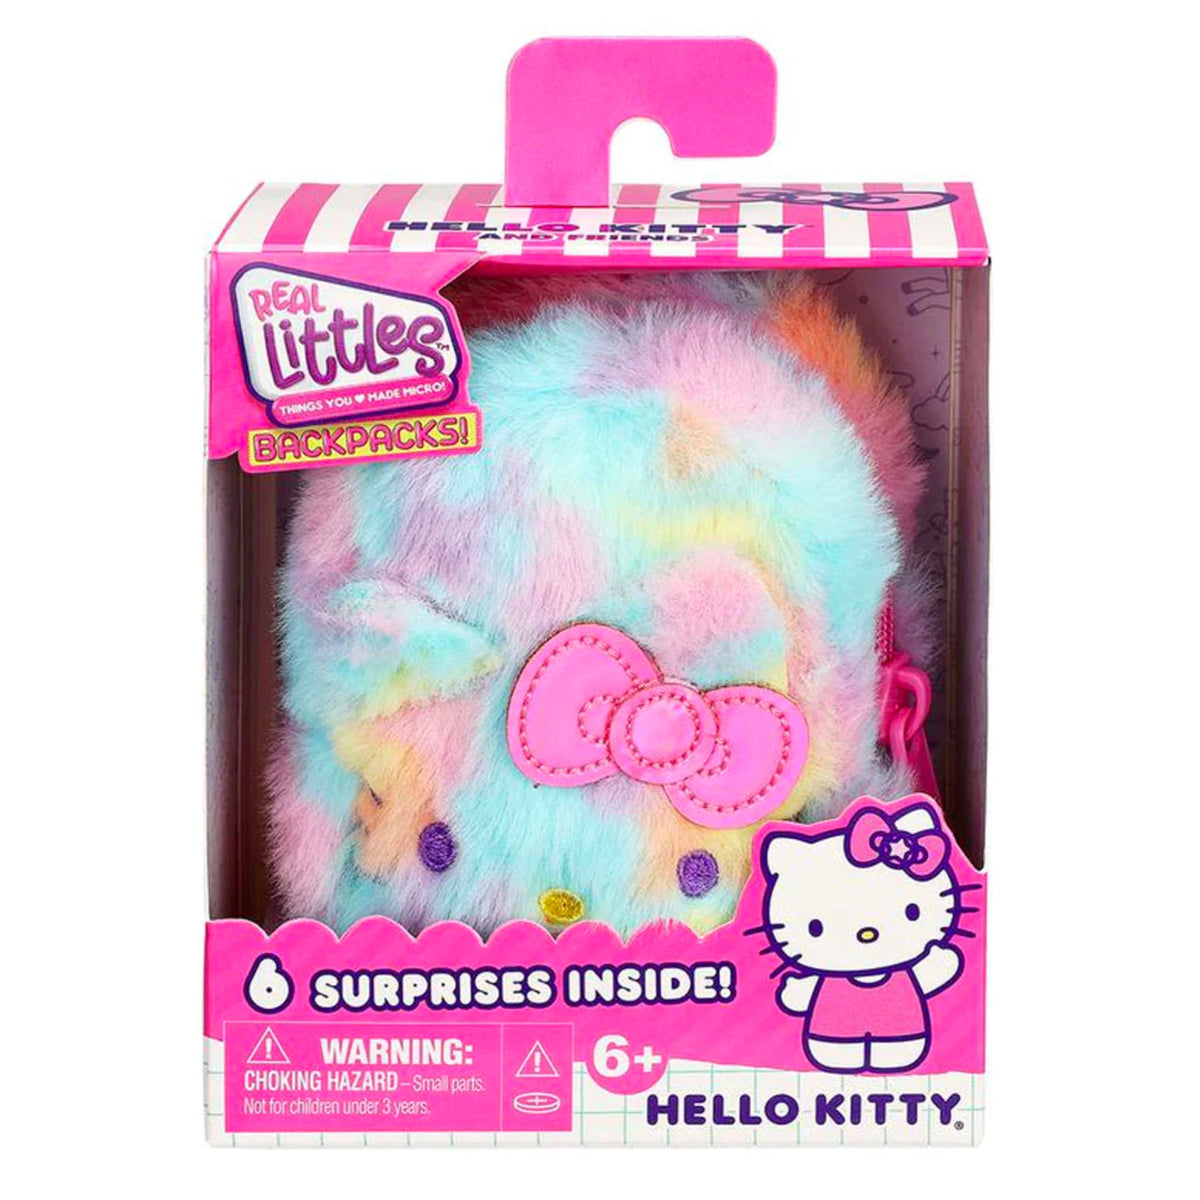 Real Littles - Hello Kitty Rainbow Mini Backpack Mystery NEW RELEASE